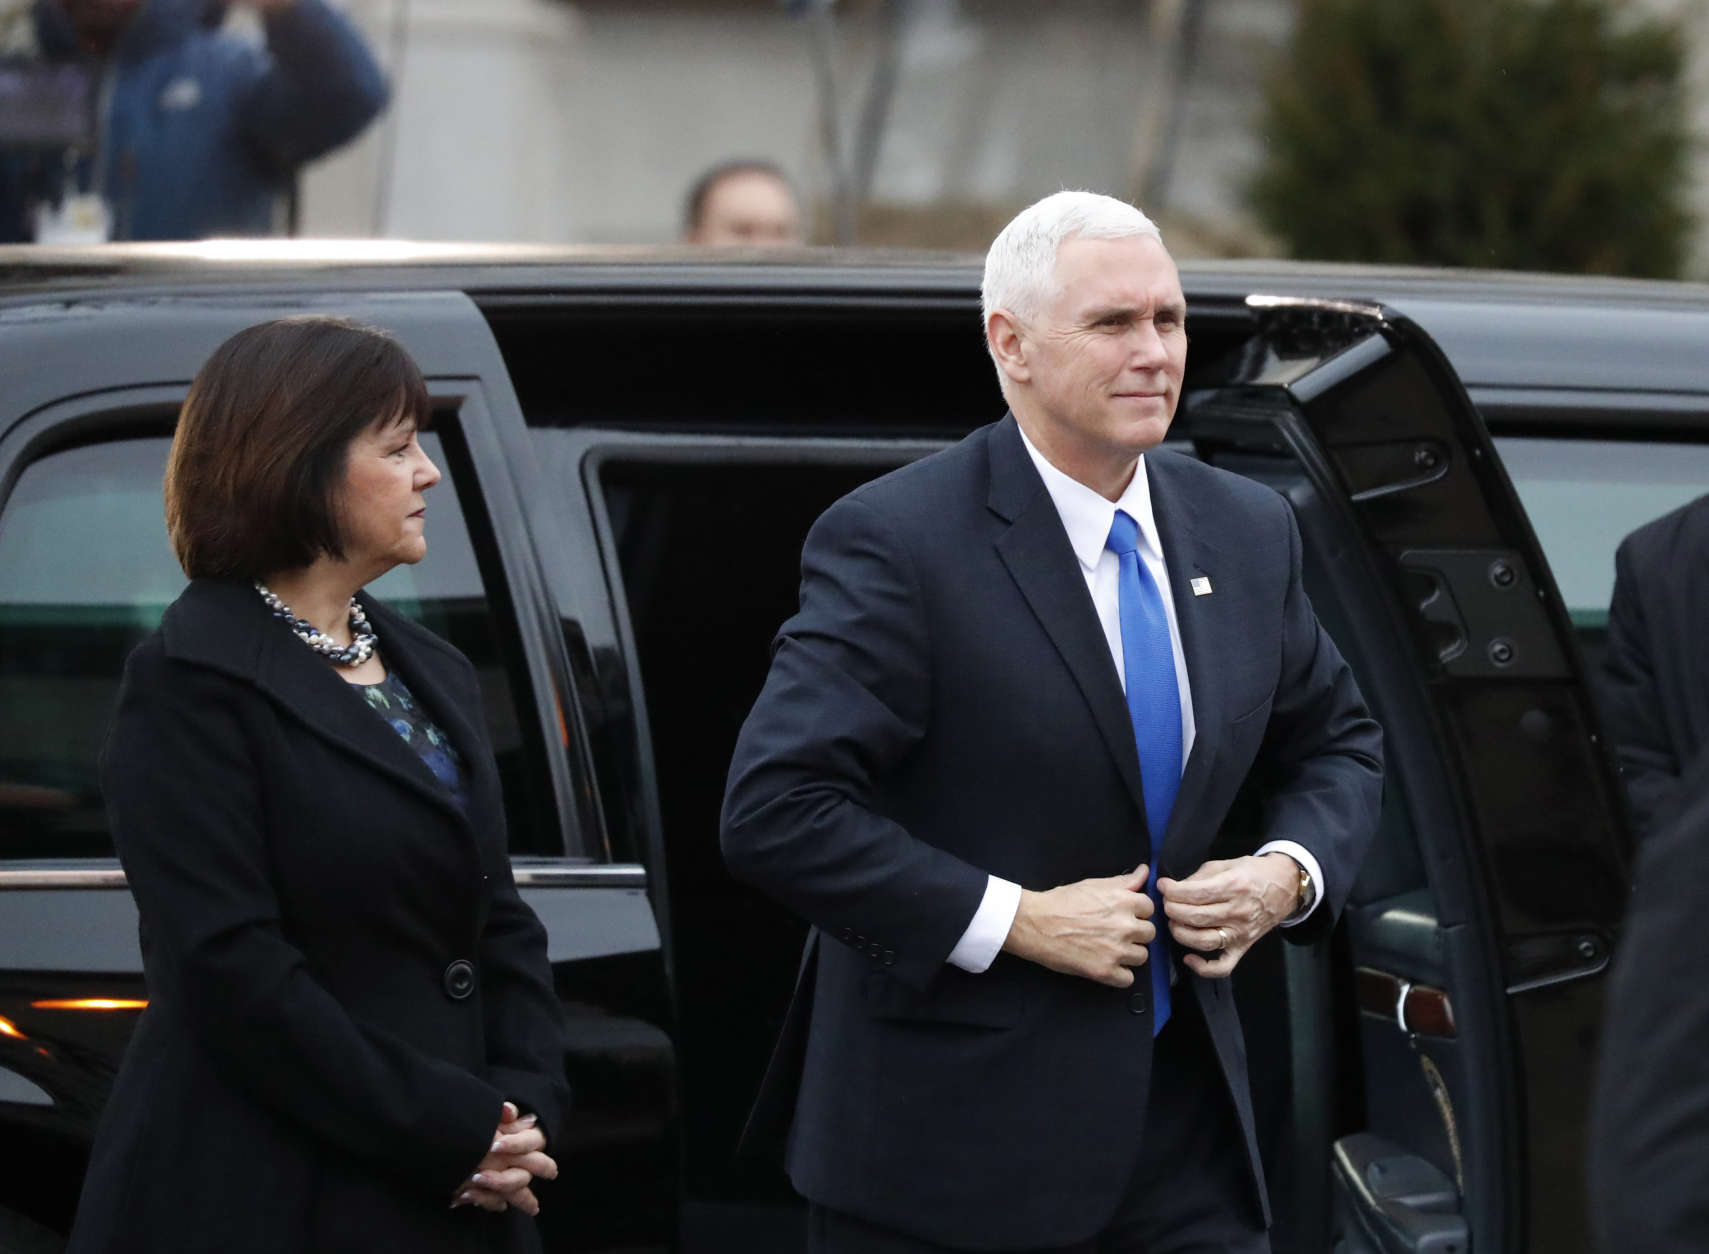 Vice President-elect Mike Pence and his wife Karen, arrives for a church service at St. John’s Episcopal Church across from the White House in Washington, Friday, Jan. 20, 2017, on Donald Trump's inauguration day. (AP Photo/Alex Brandon)